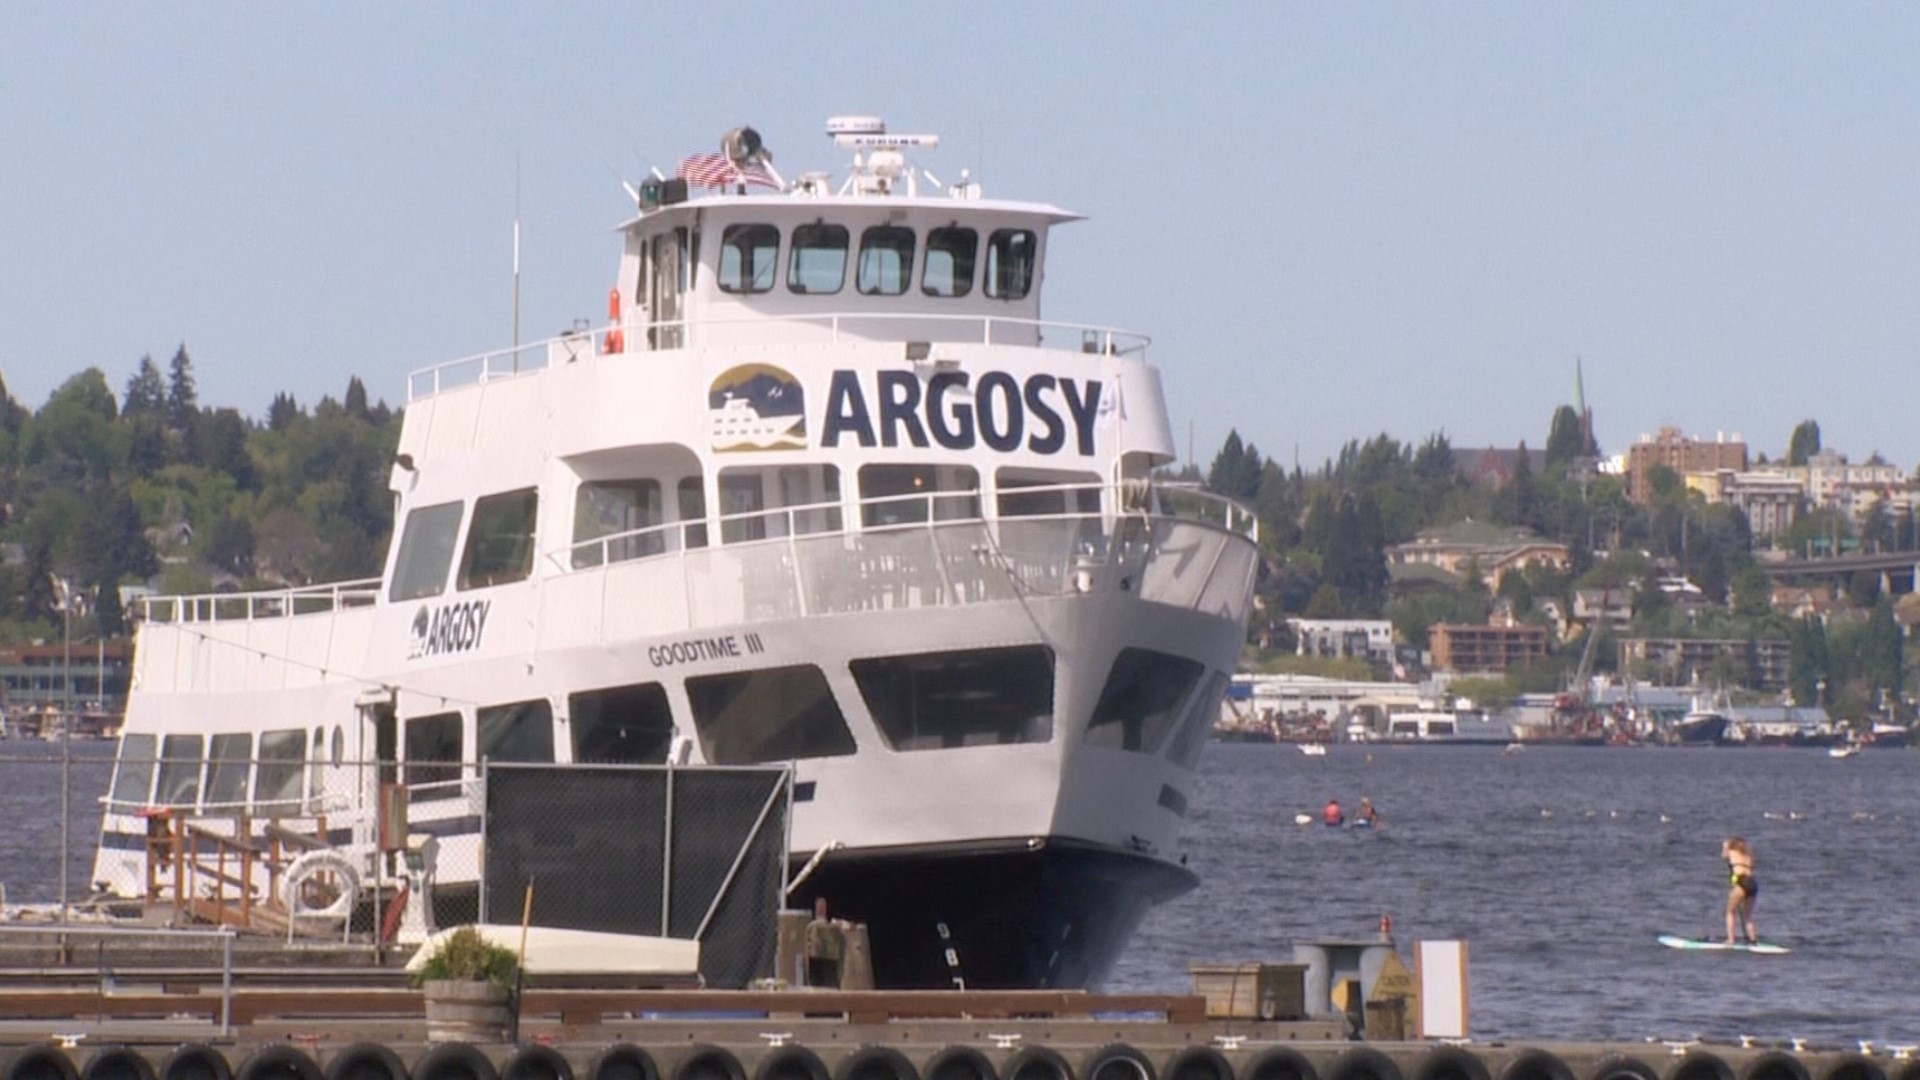 The company started in 1949 as the Spring Street Water Taxi. Sponsored by Argosy Cruises